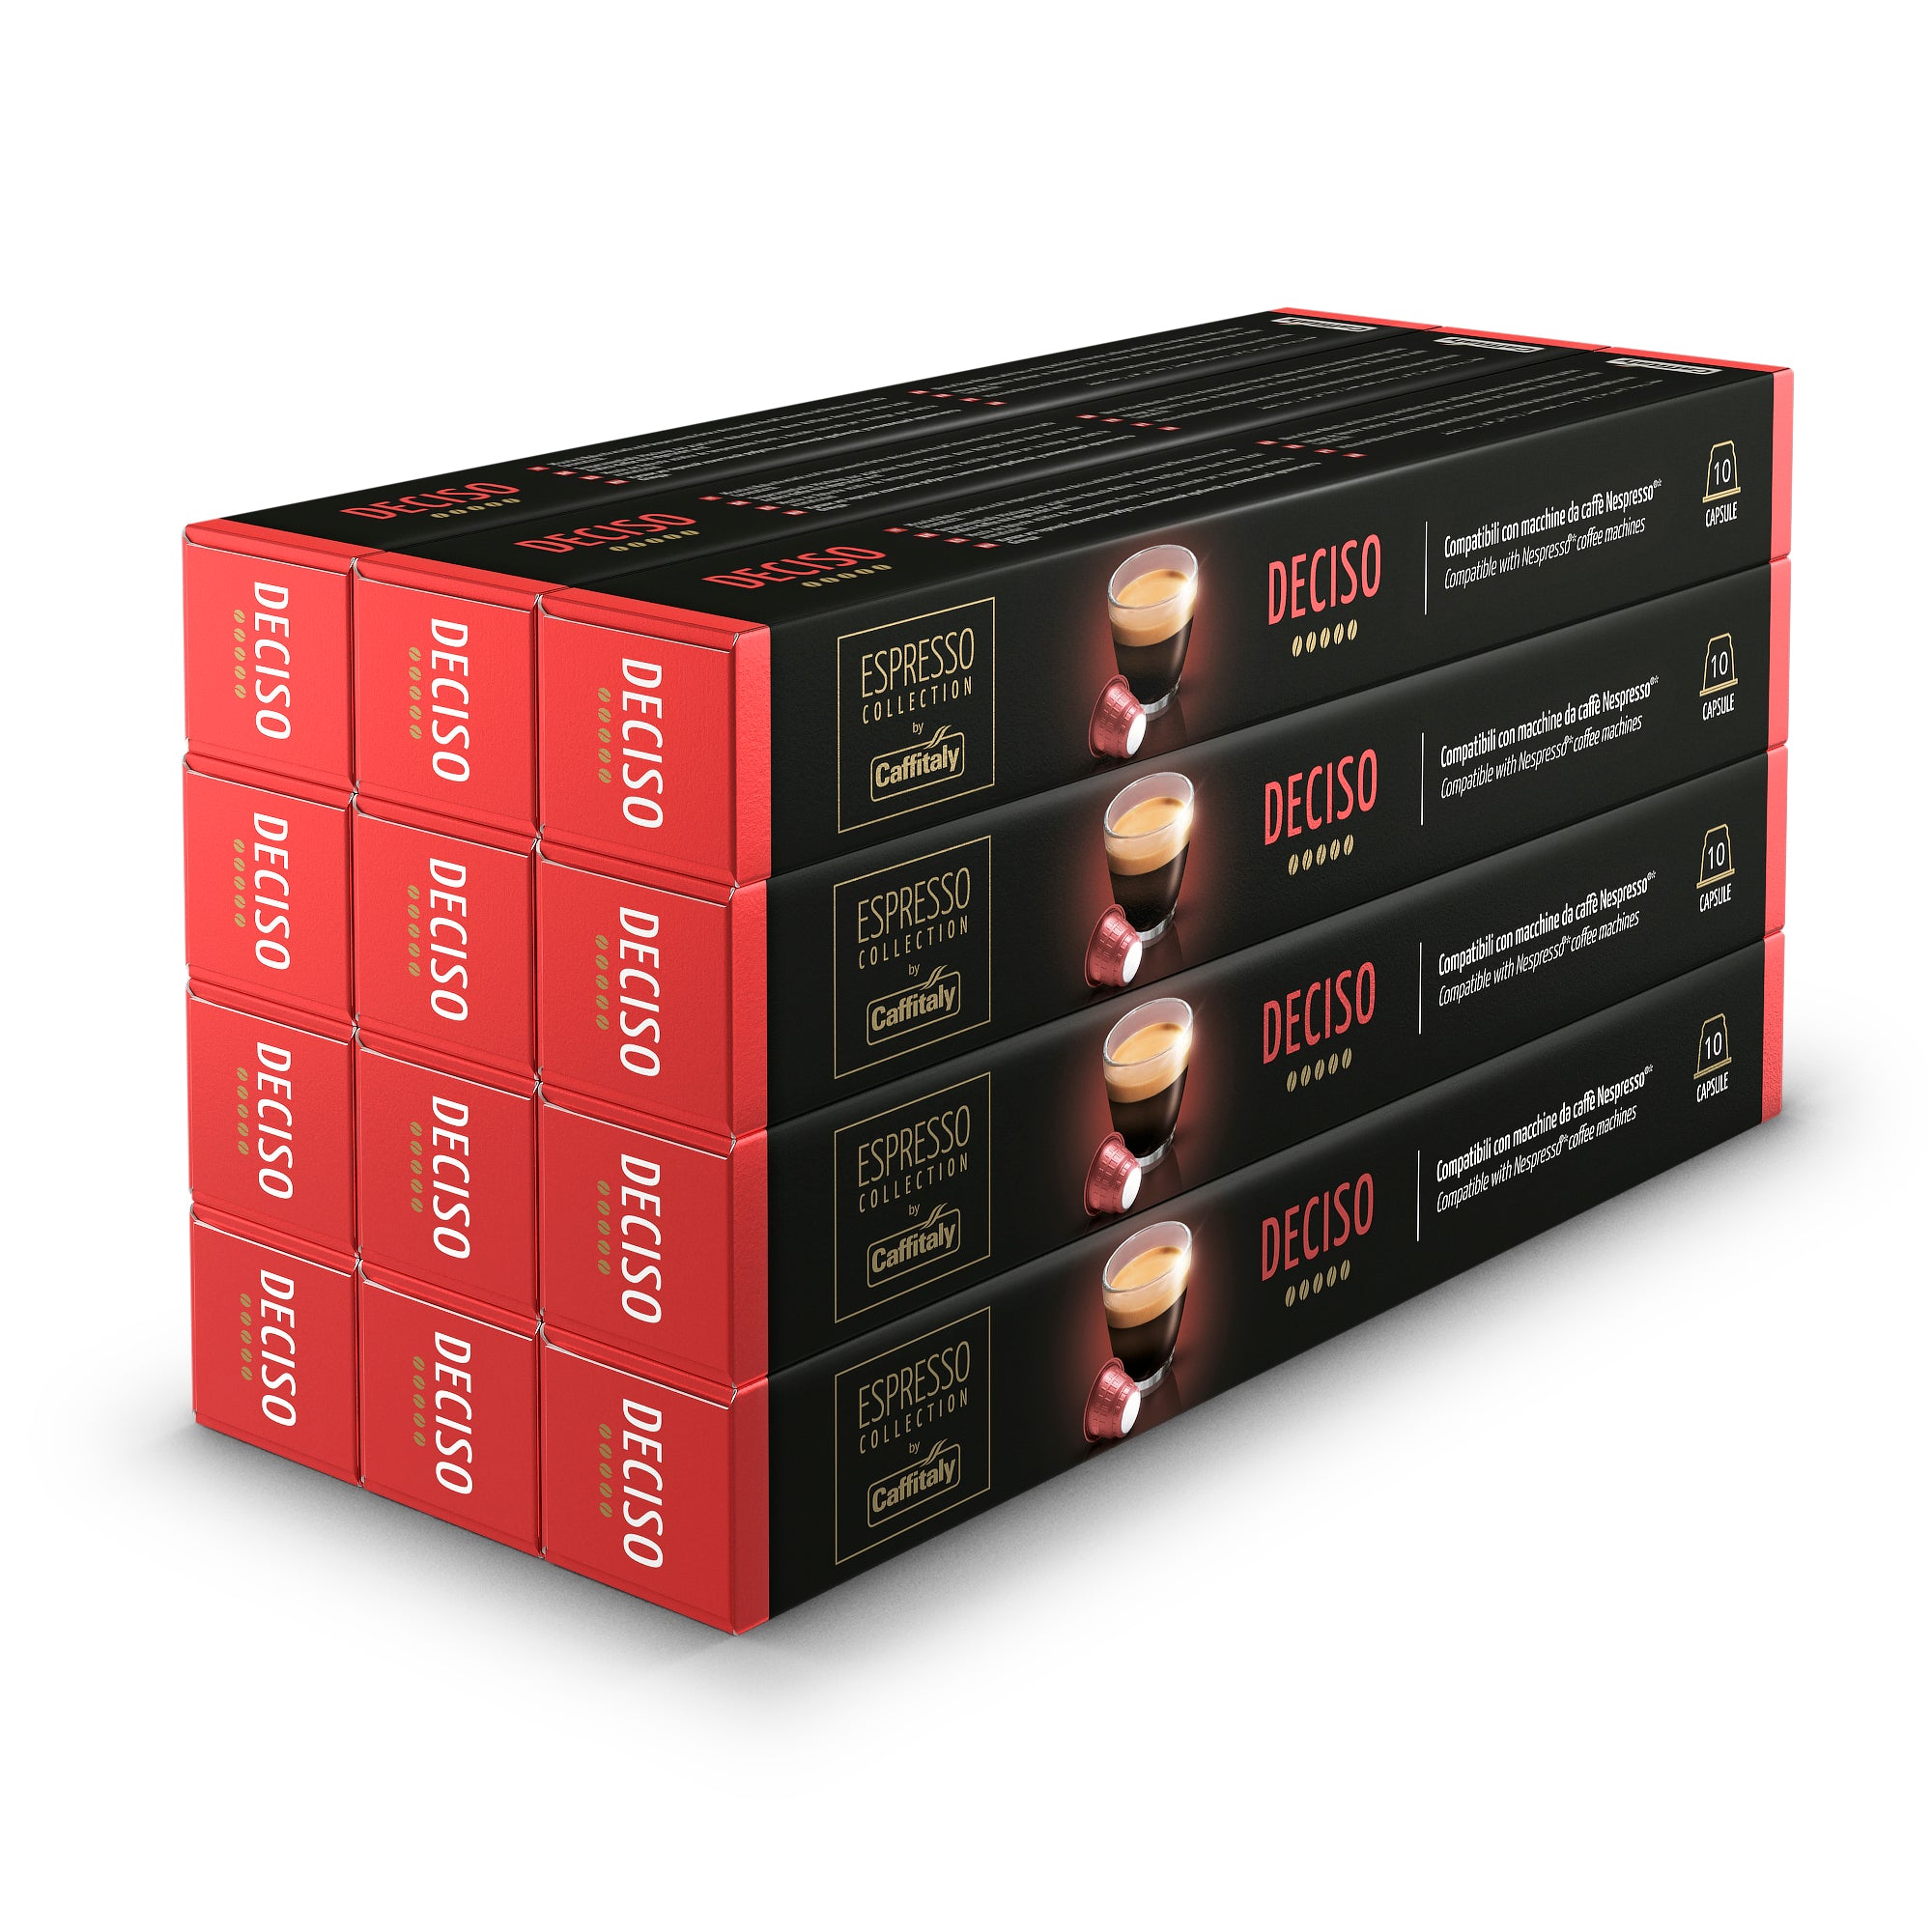 Intens Hammer Spekulerer Caffitaly Nespresso Compatible Coffee Capsules Deciso – Pods and Beans